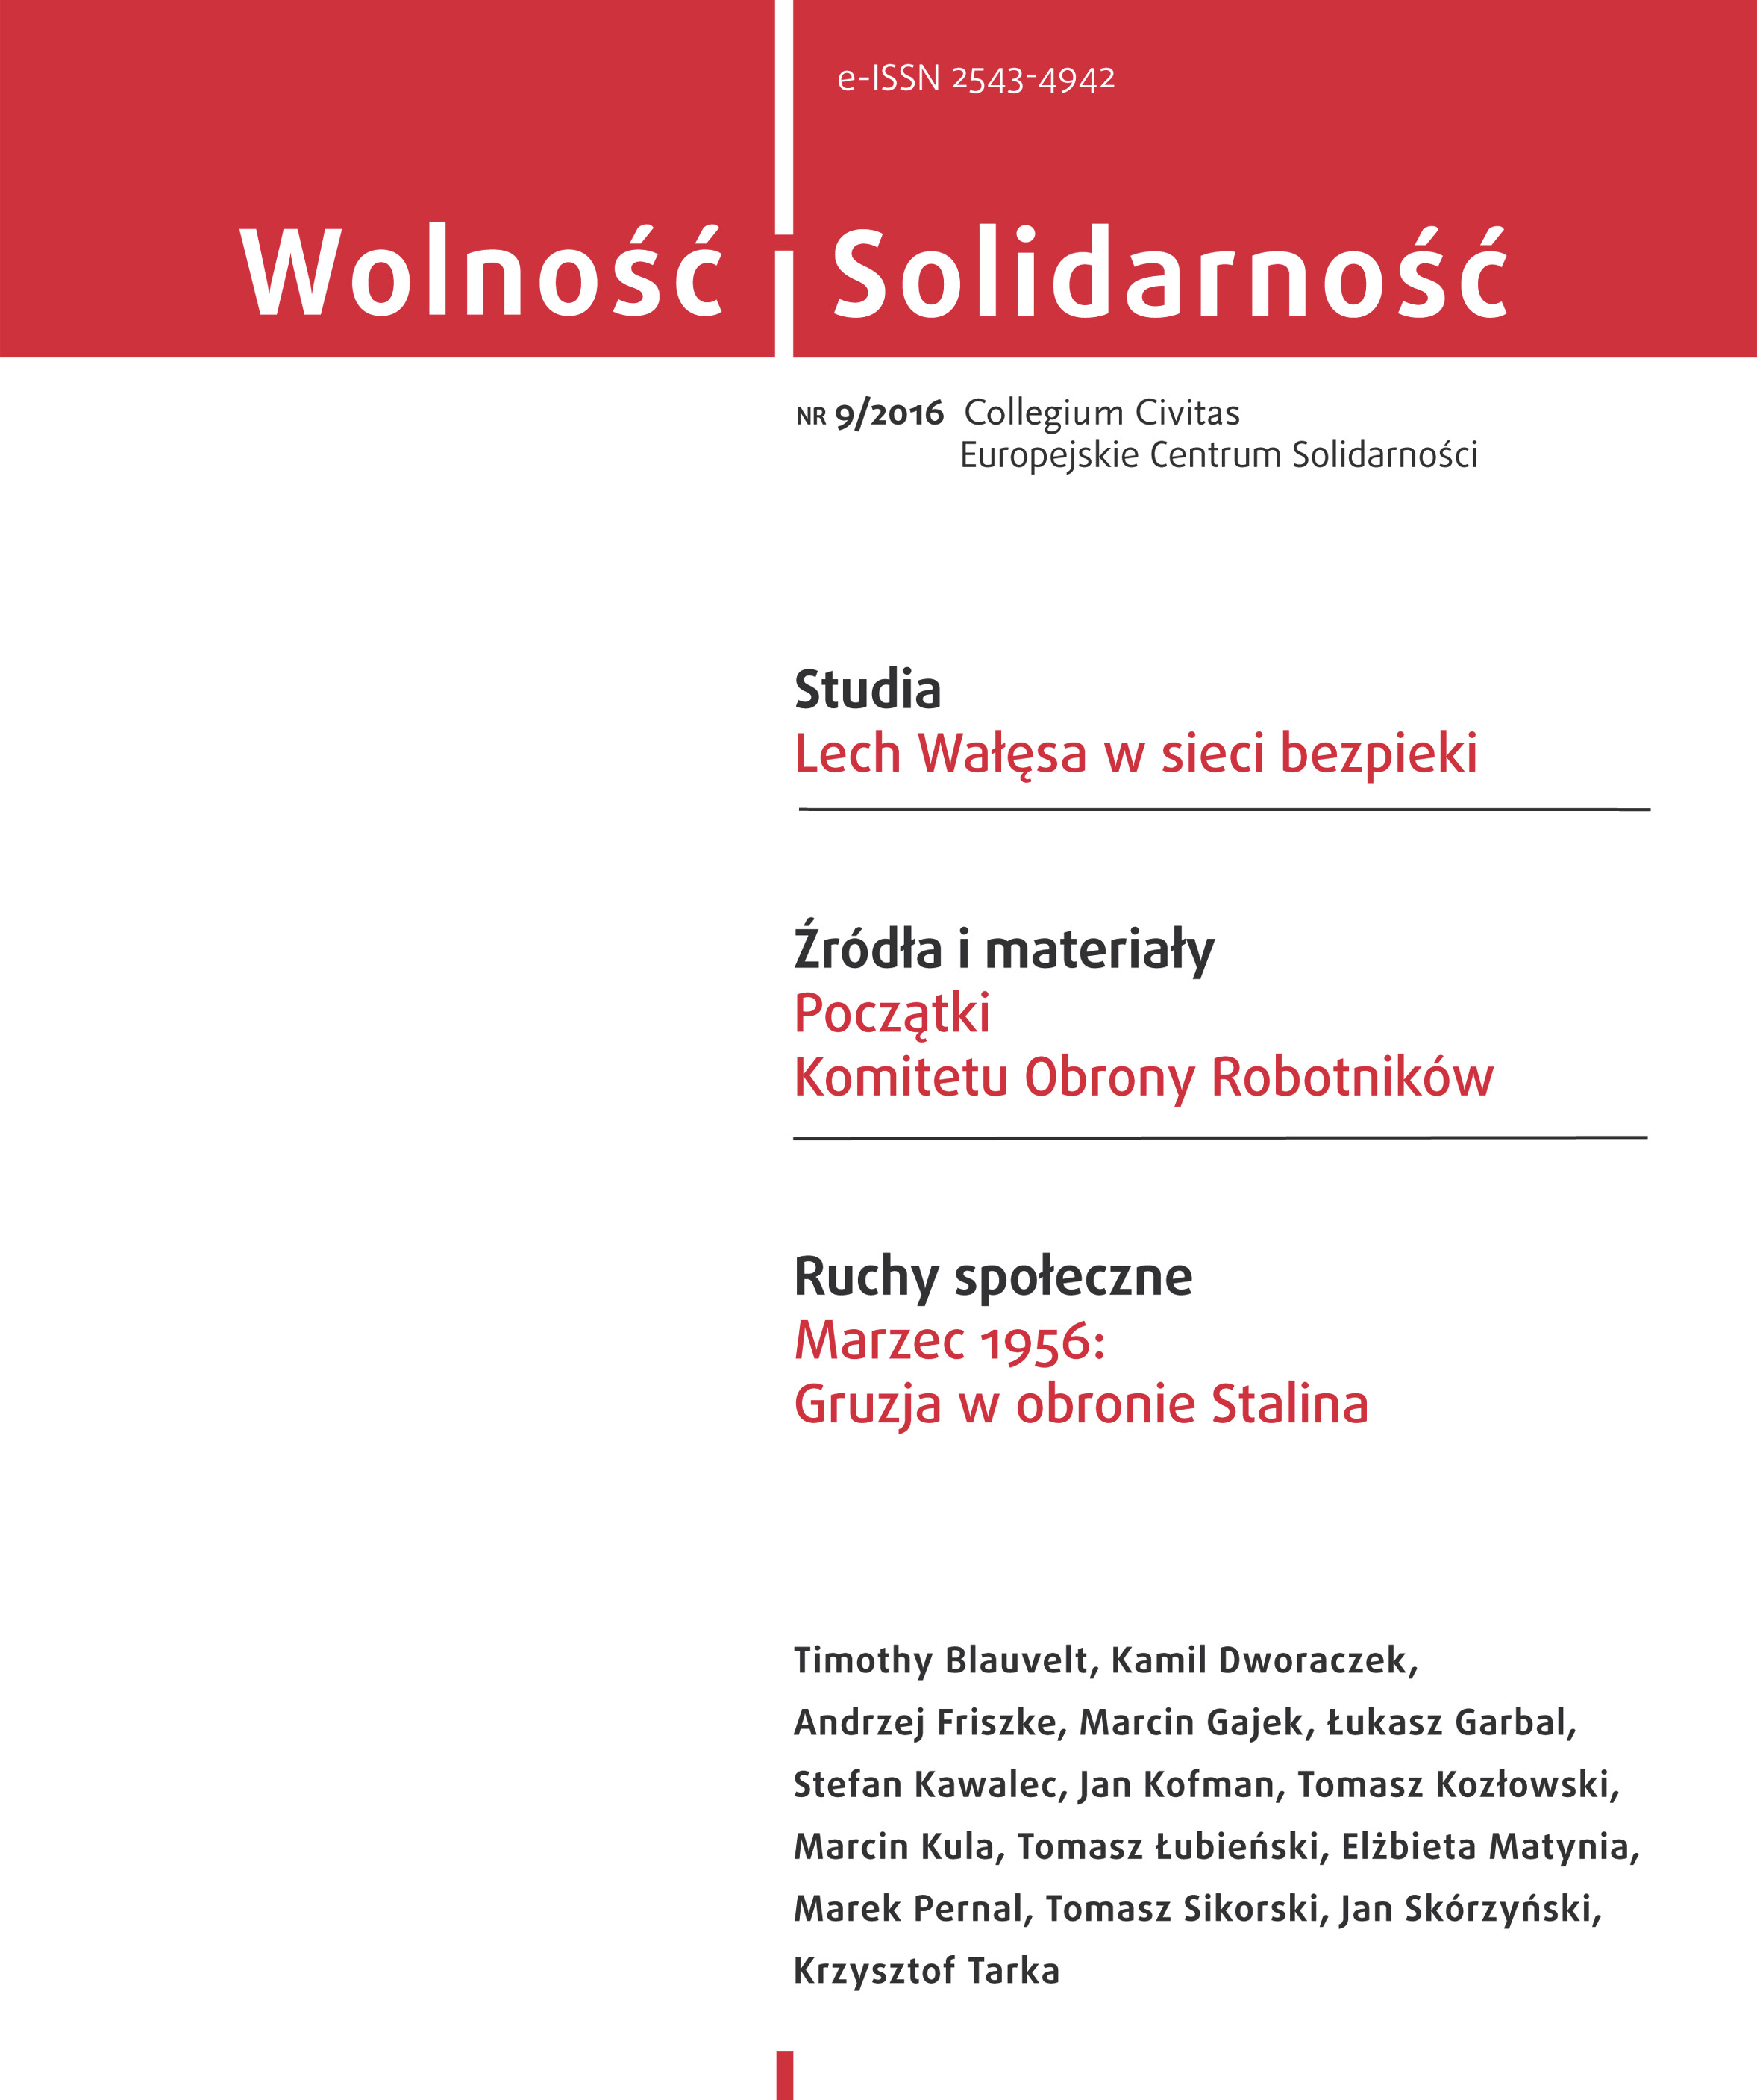 Democratic opposition in Poland (June events and year of work of the Workers' Defense Committee) Cover Image